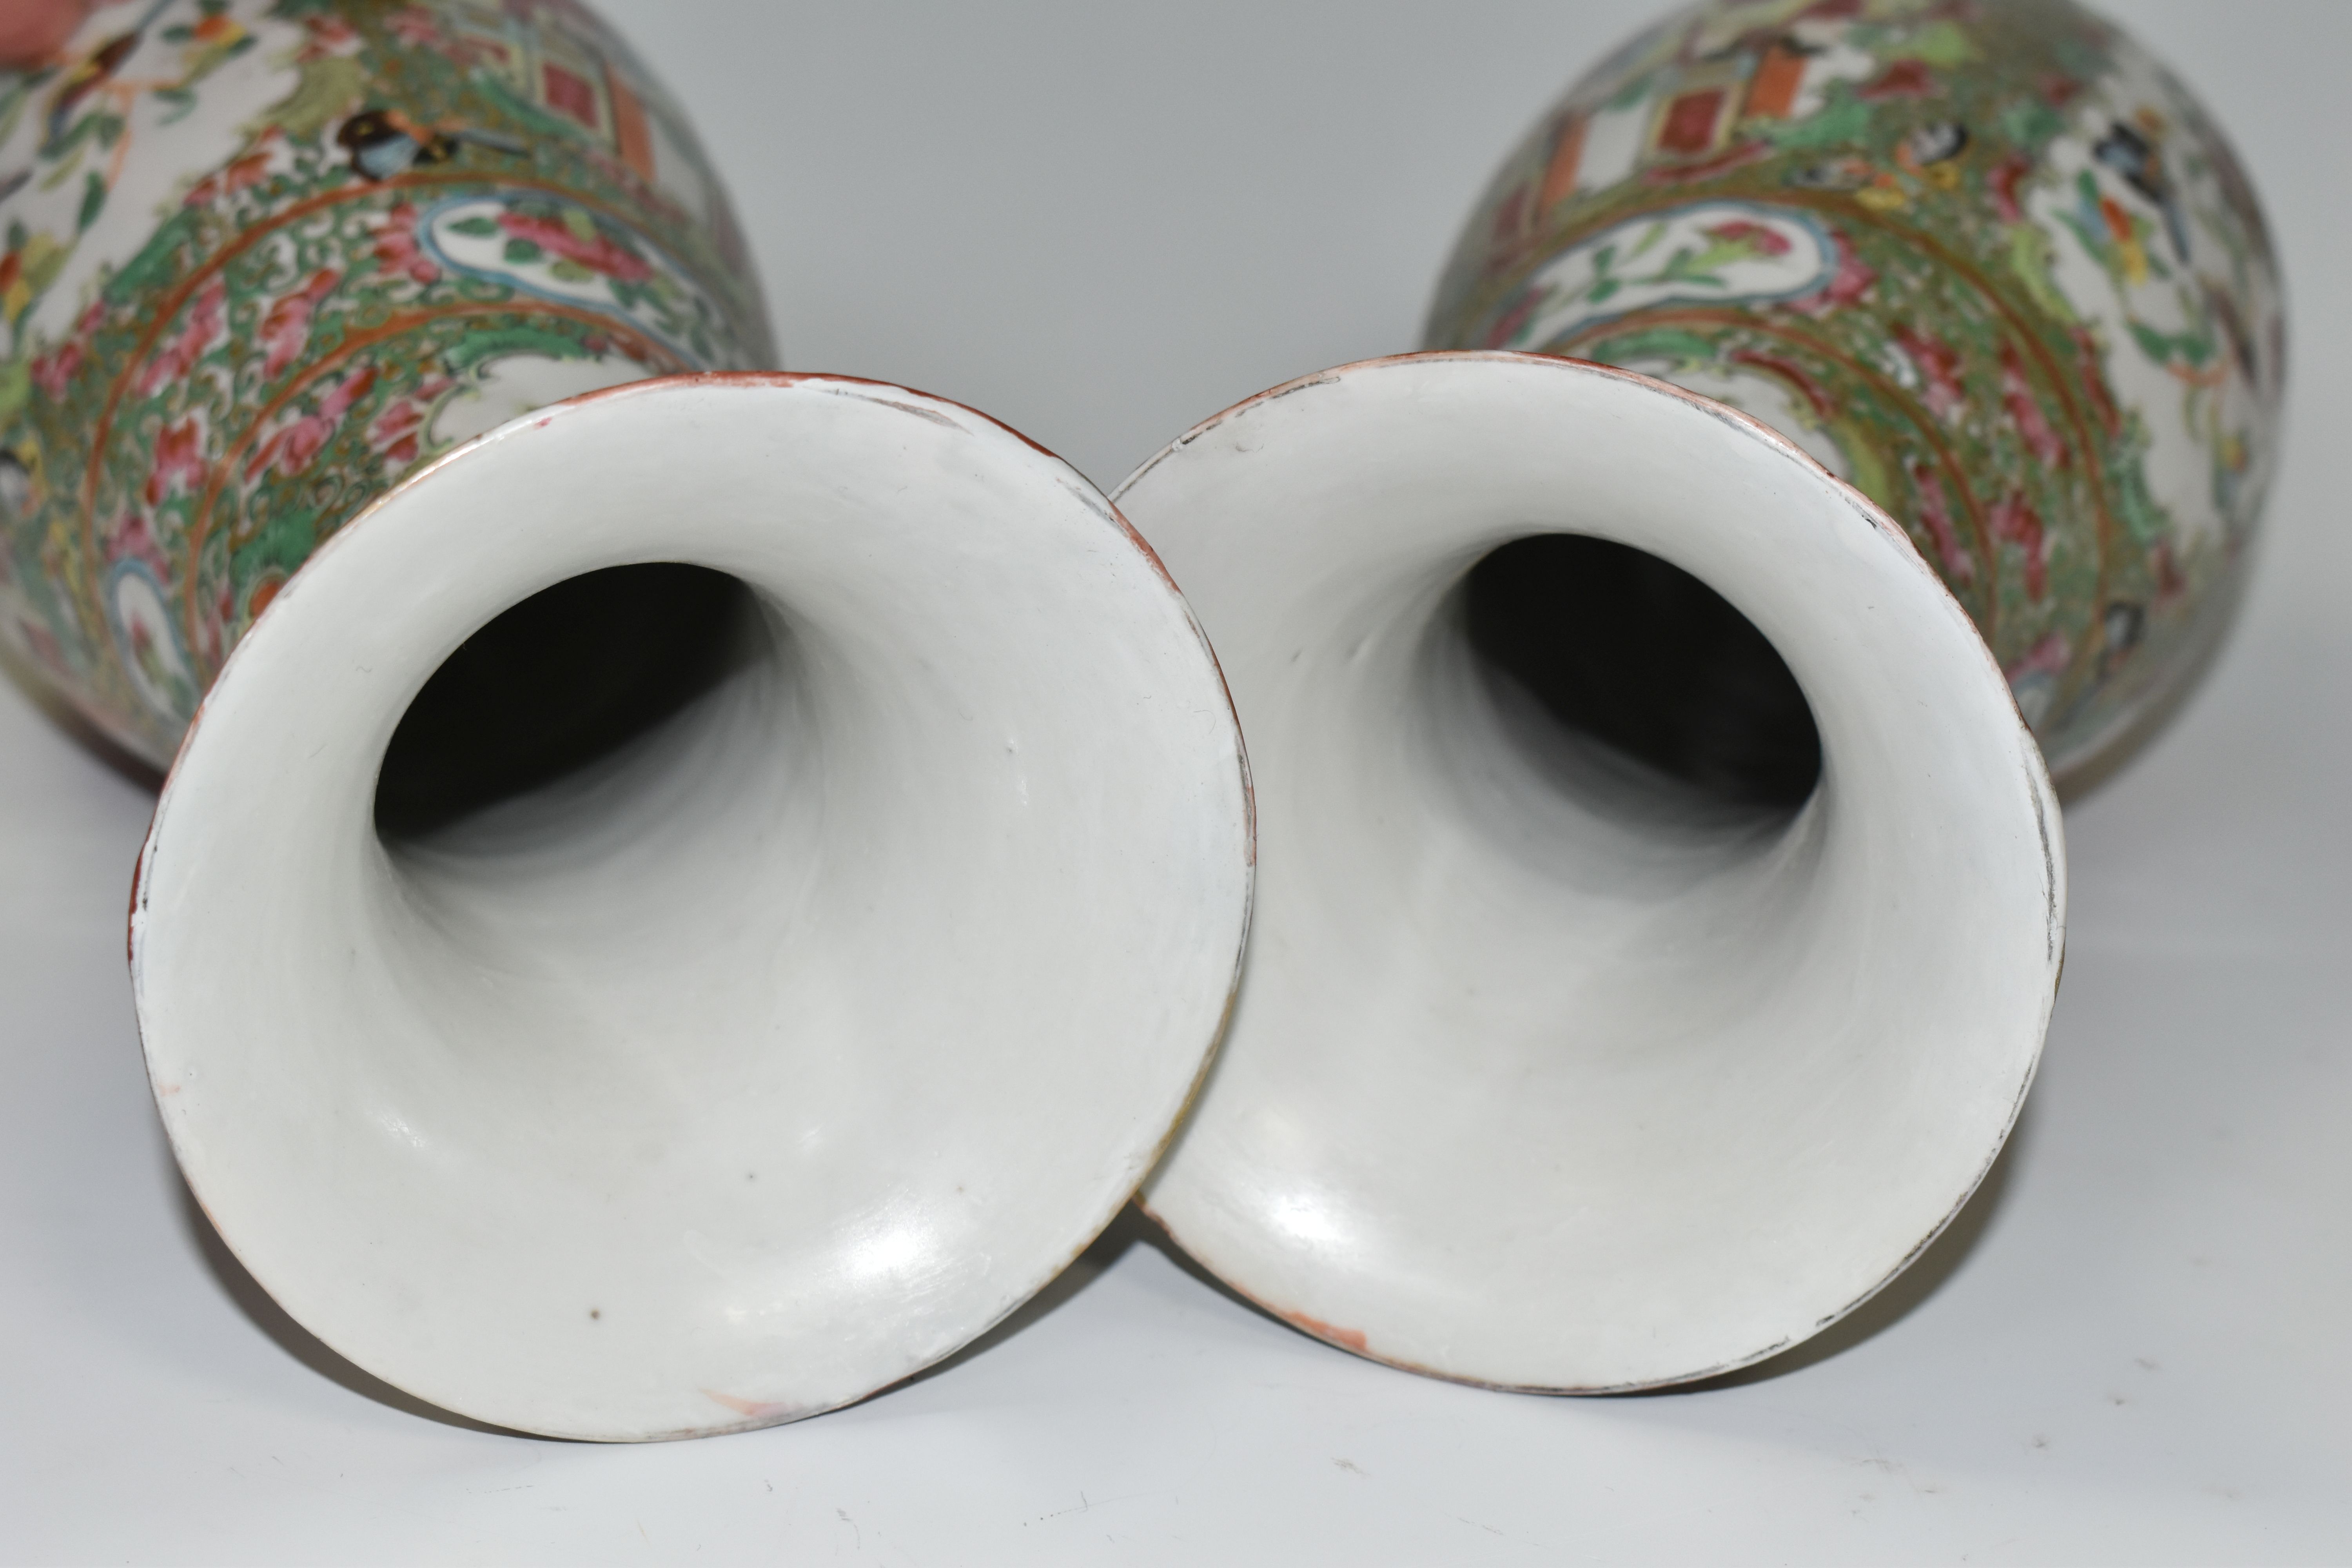 A NEAR PAIR OF LATE 19TH CENTURY CHINESE CANTON FAMILLE ROSE PORCELAIN BALUSTER VASES, with flared - Image 4 of 5